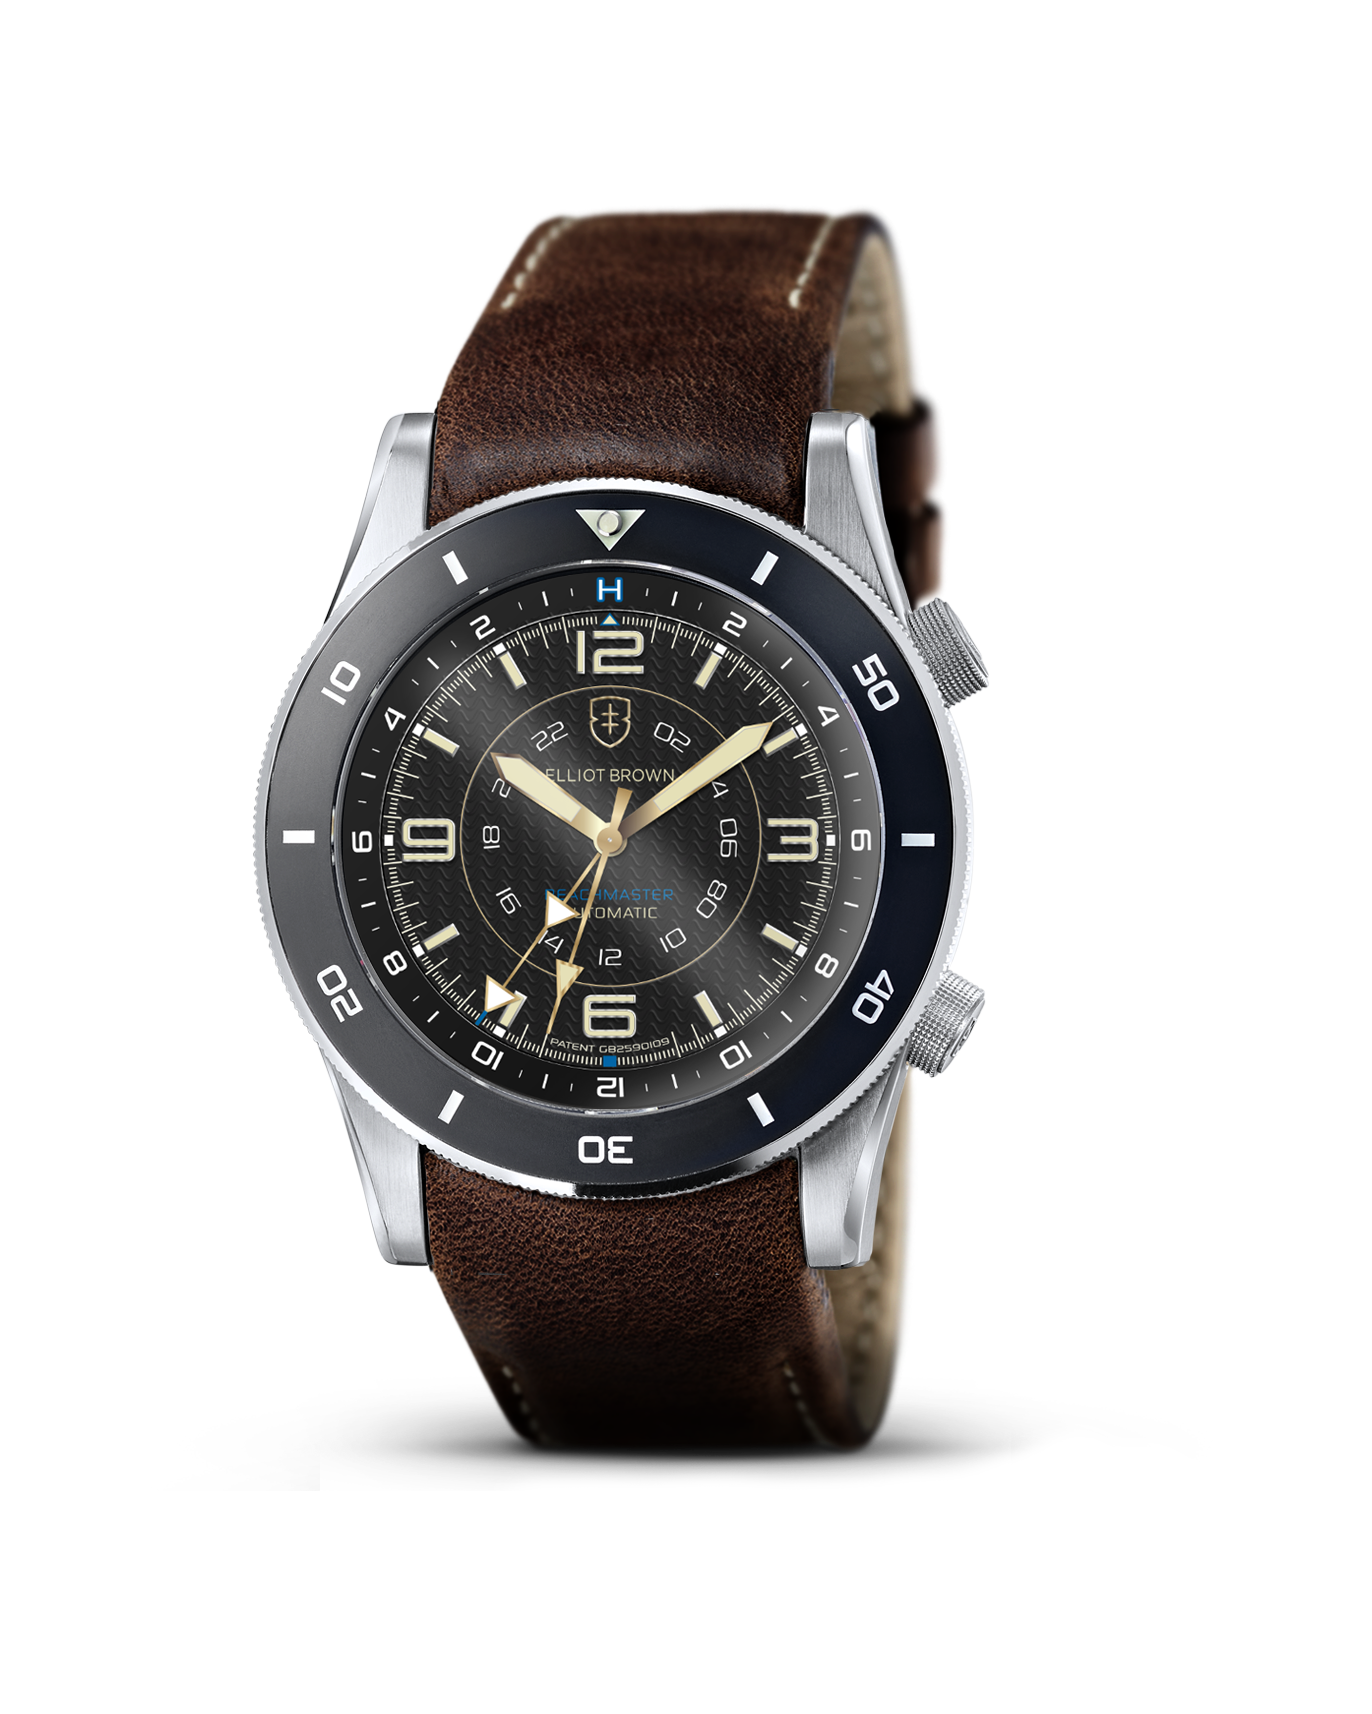 BEACHMASTER AUTOMATIC: D-DAY 80TH LIMITED EDITION